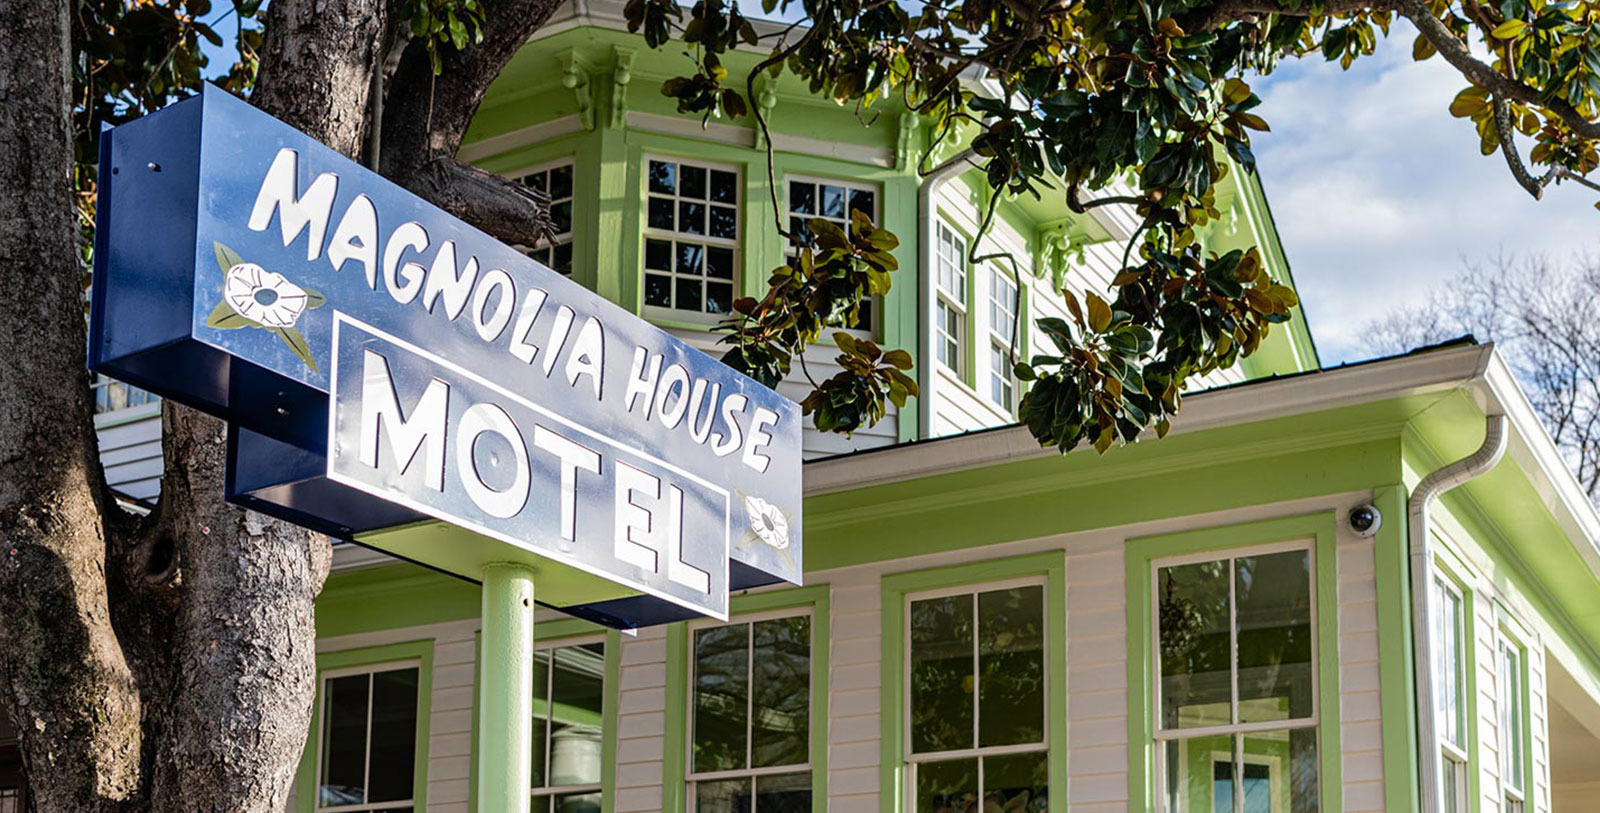 Discover the history of the Green Book and the significance that The Historic Magnolia House played.